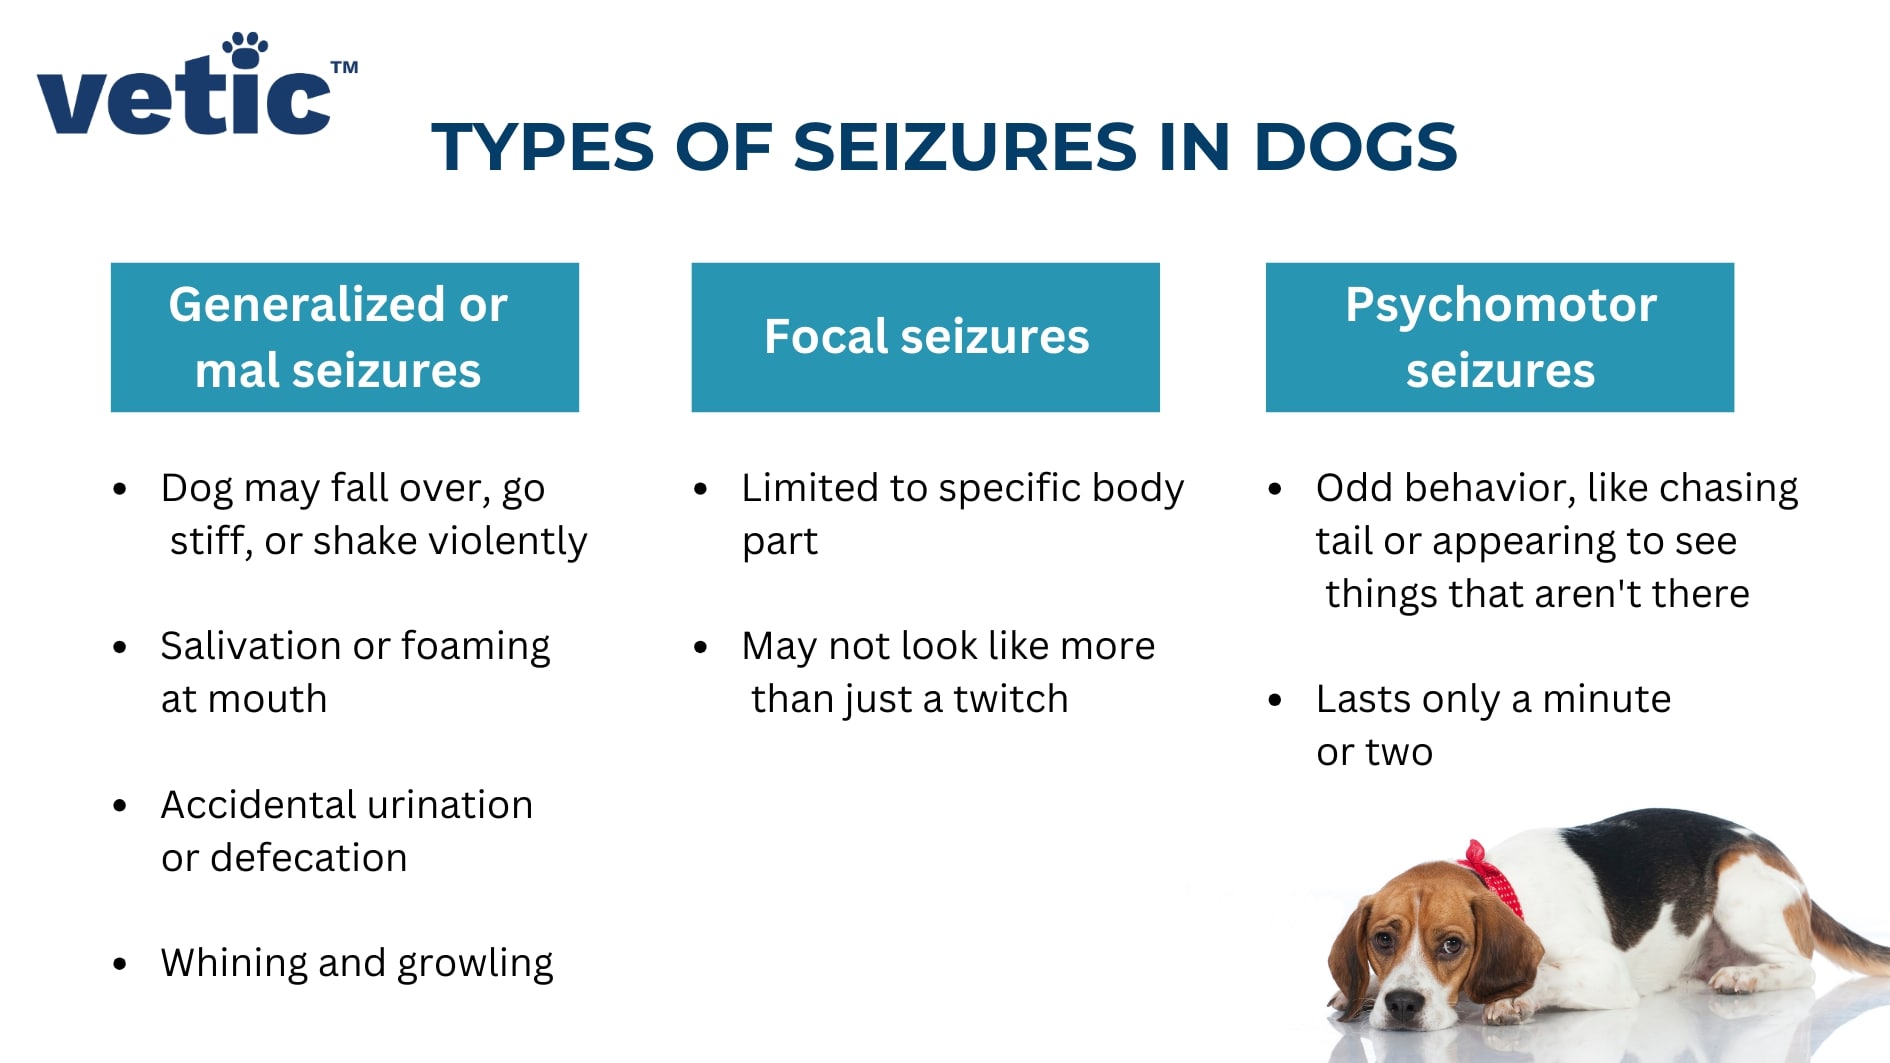 infographic titled "Types of Seizures in Dogs". The 3 main types of seizures are Generalized or Grand Mal Seizures, Focal Seizures, and Psychomotor Seizures. The symptoms of the three types of seizures in dogs is also discussed in the image. these are - dog may fall and shake violently, foam at the mouth, drool excessively, accidental urination and defecation, whining or growling.